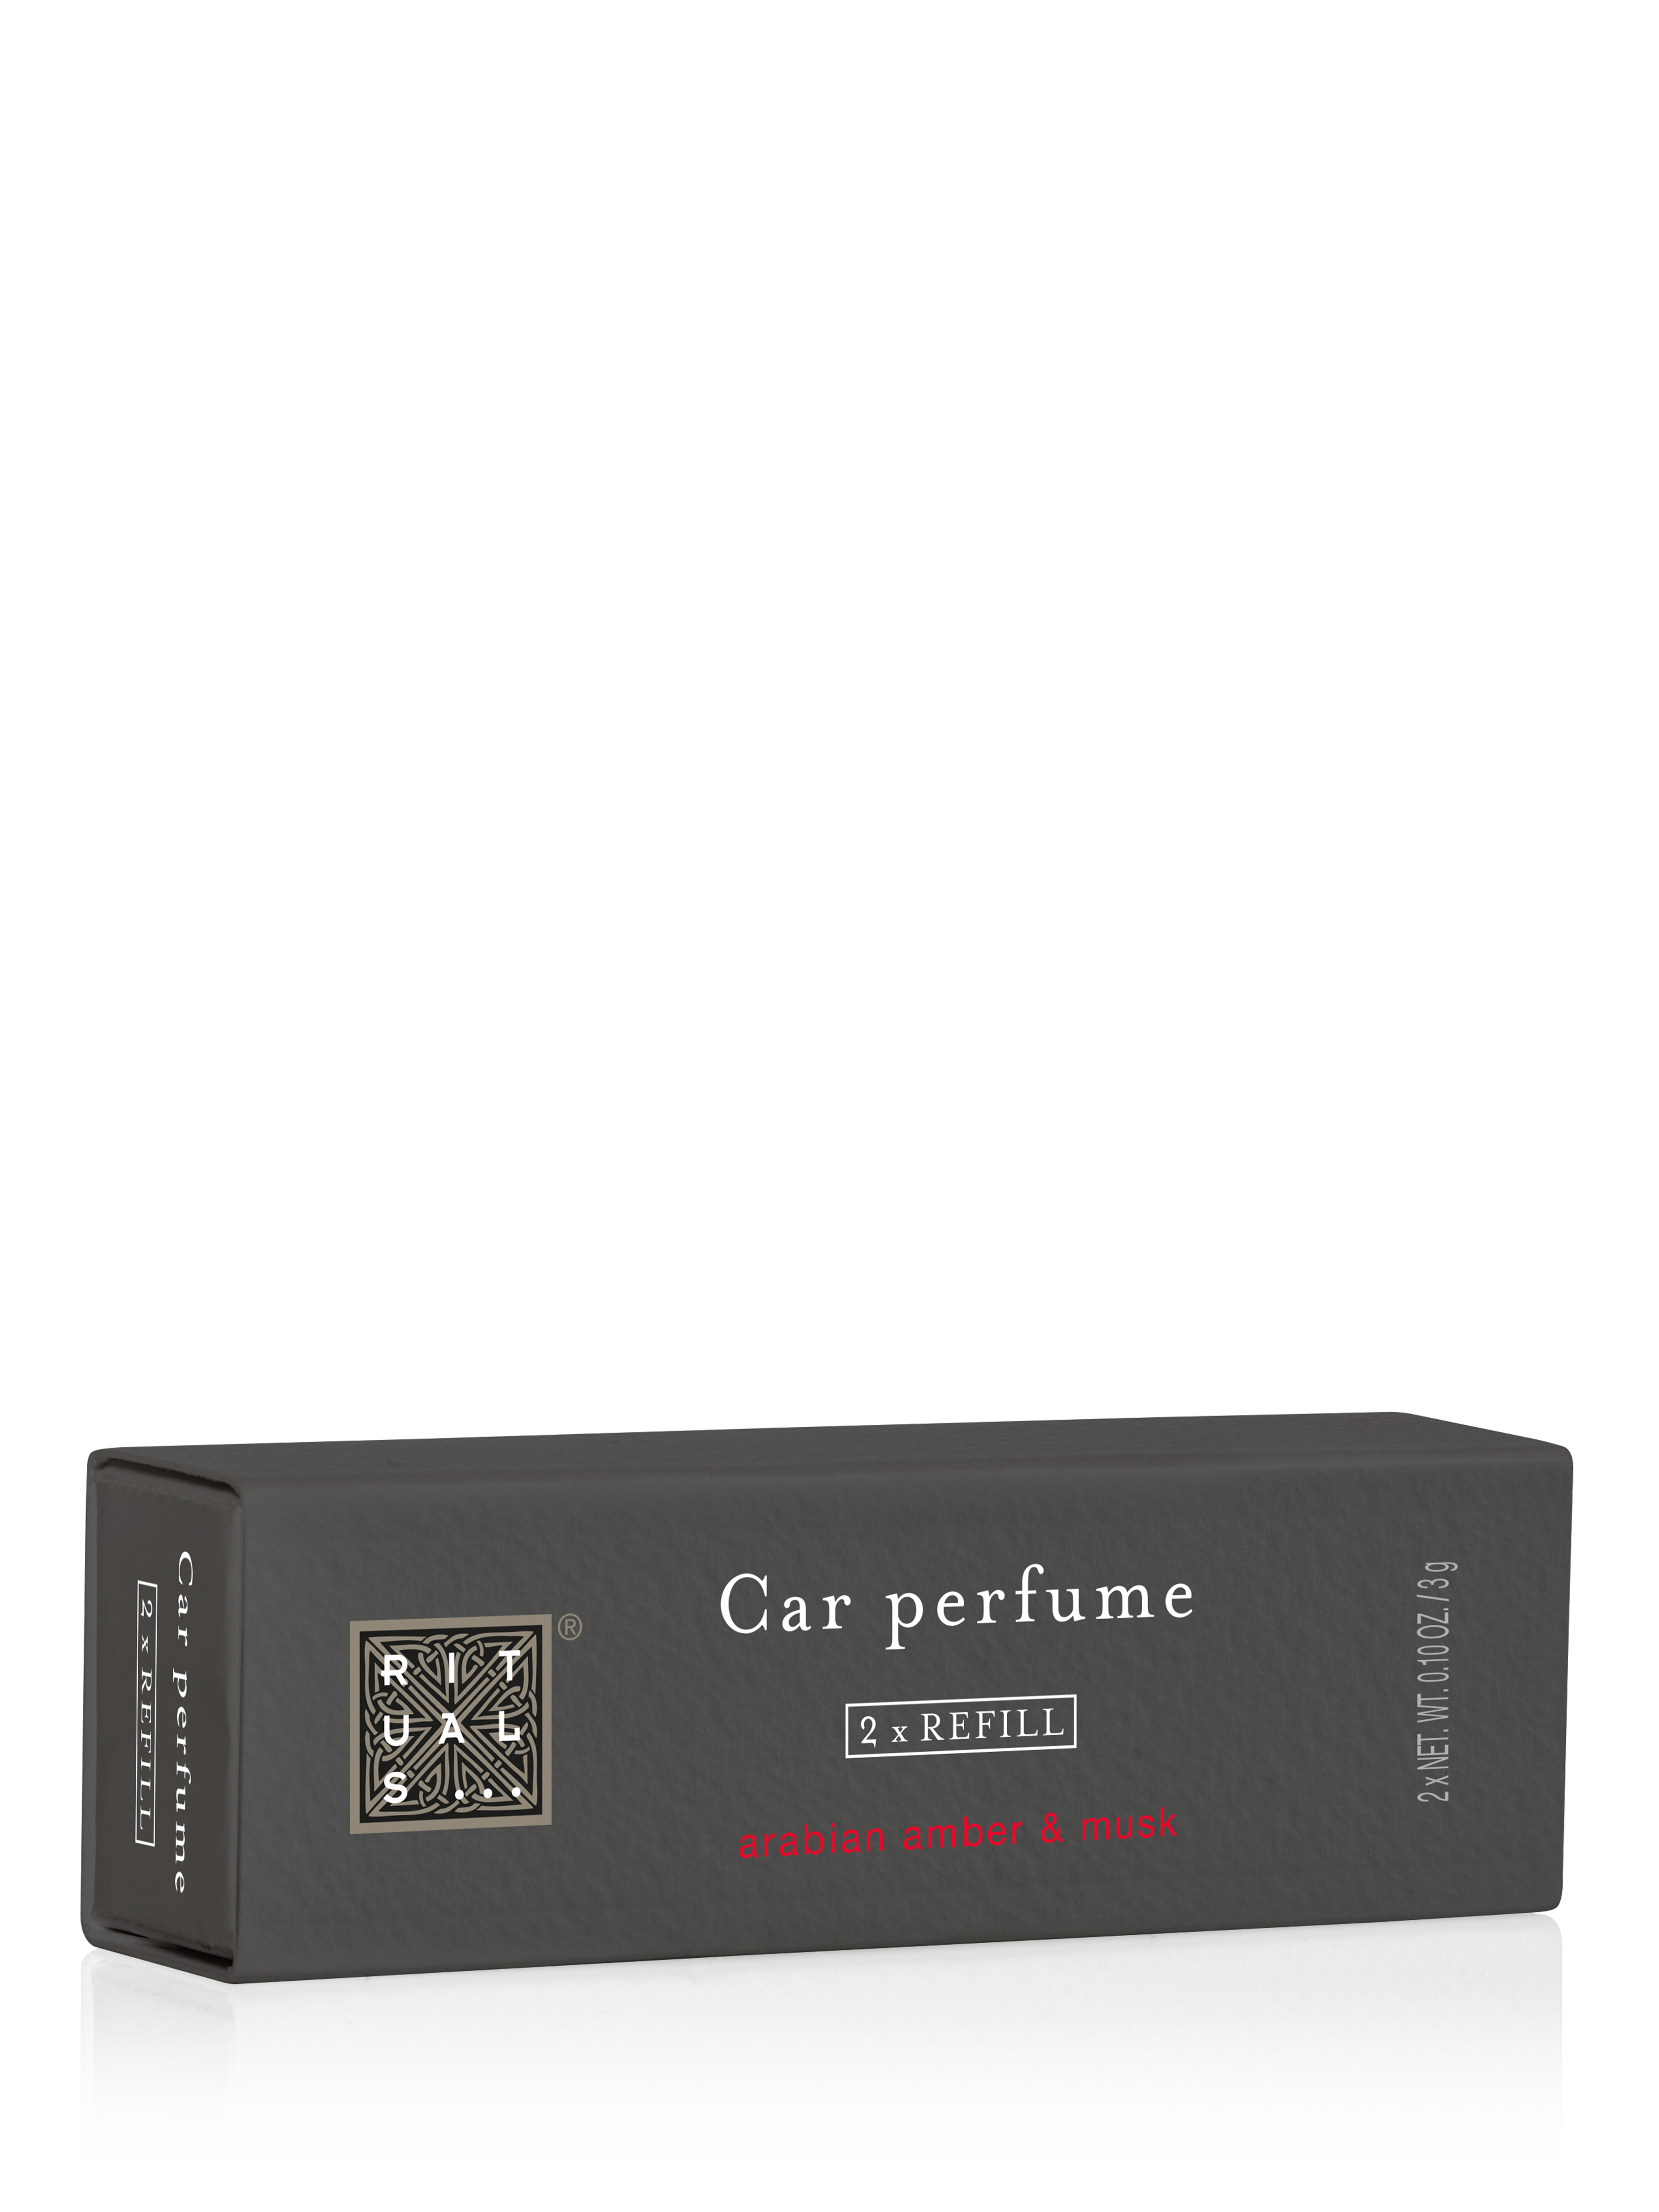 https://lyko.com/globalassets/product-images/rituals-life-is-a-journey-refill-car-perfume-6-g-1808-776-0006_2.png?ref=09780749DA